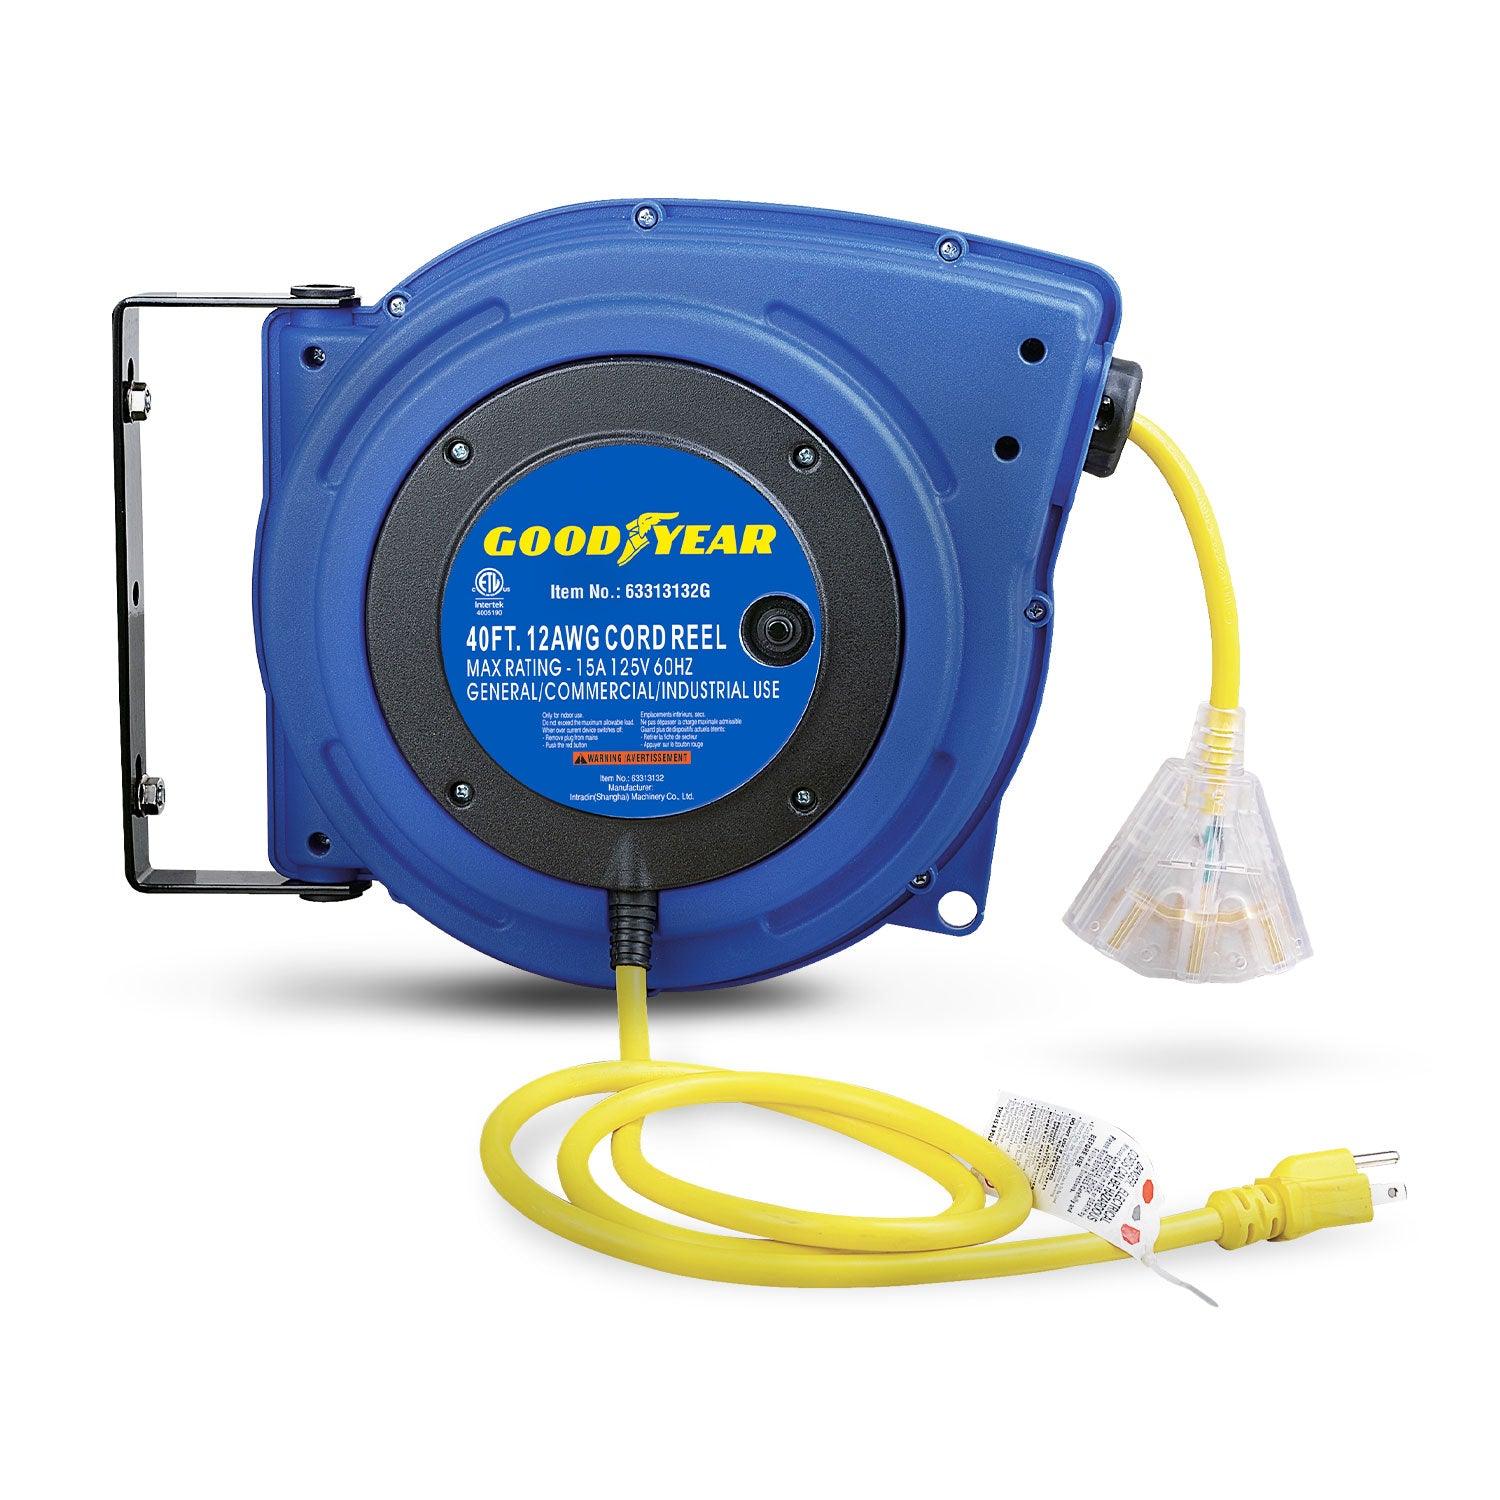 Goodyear Extension Cord Reel - 12AWG x 40' Ft, 3 Grounded Outlets